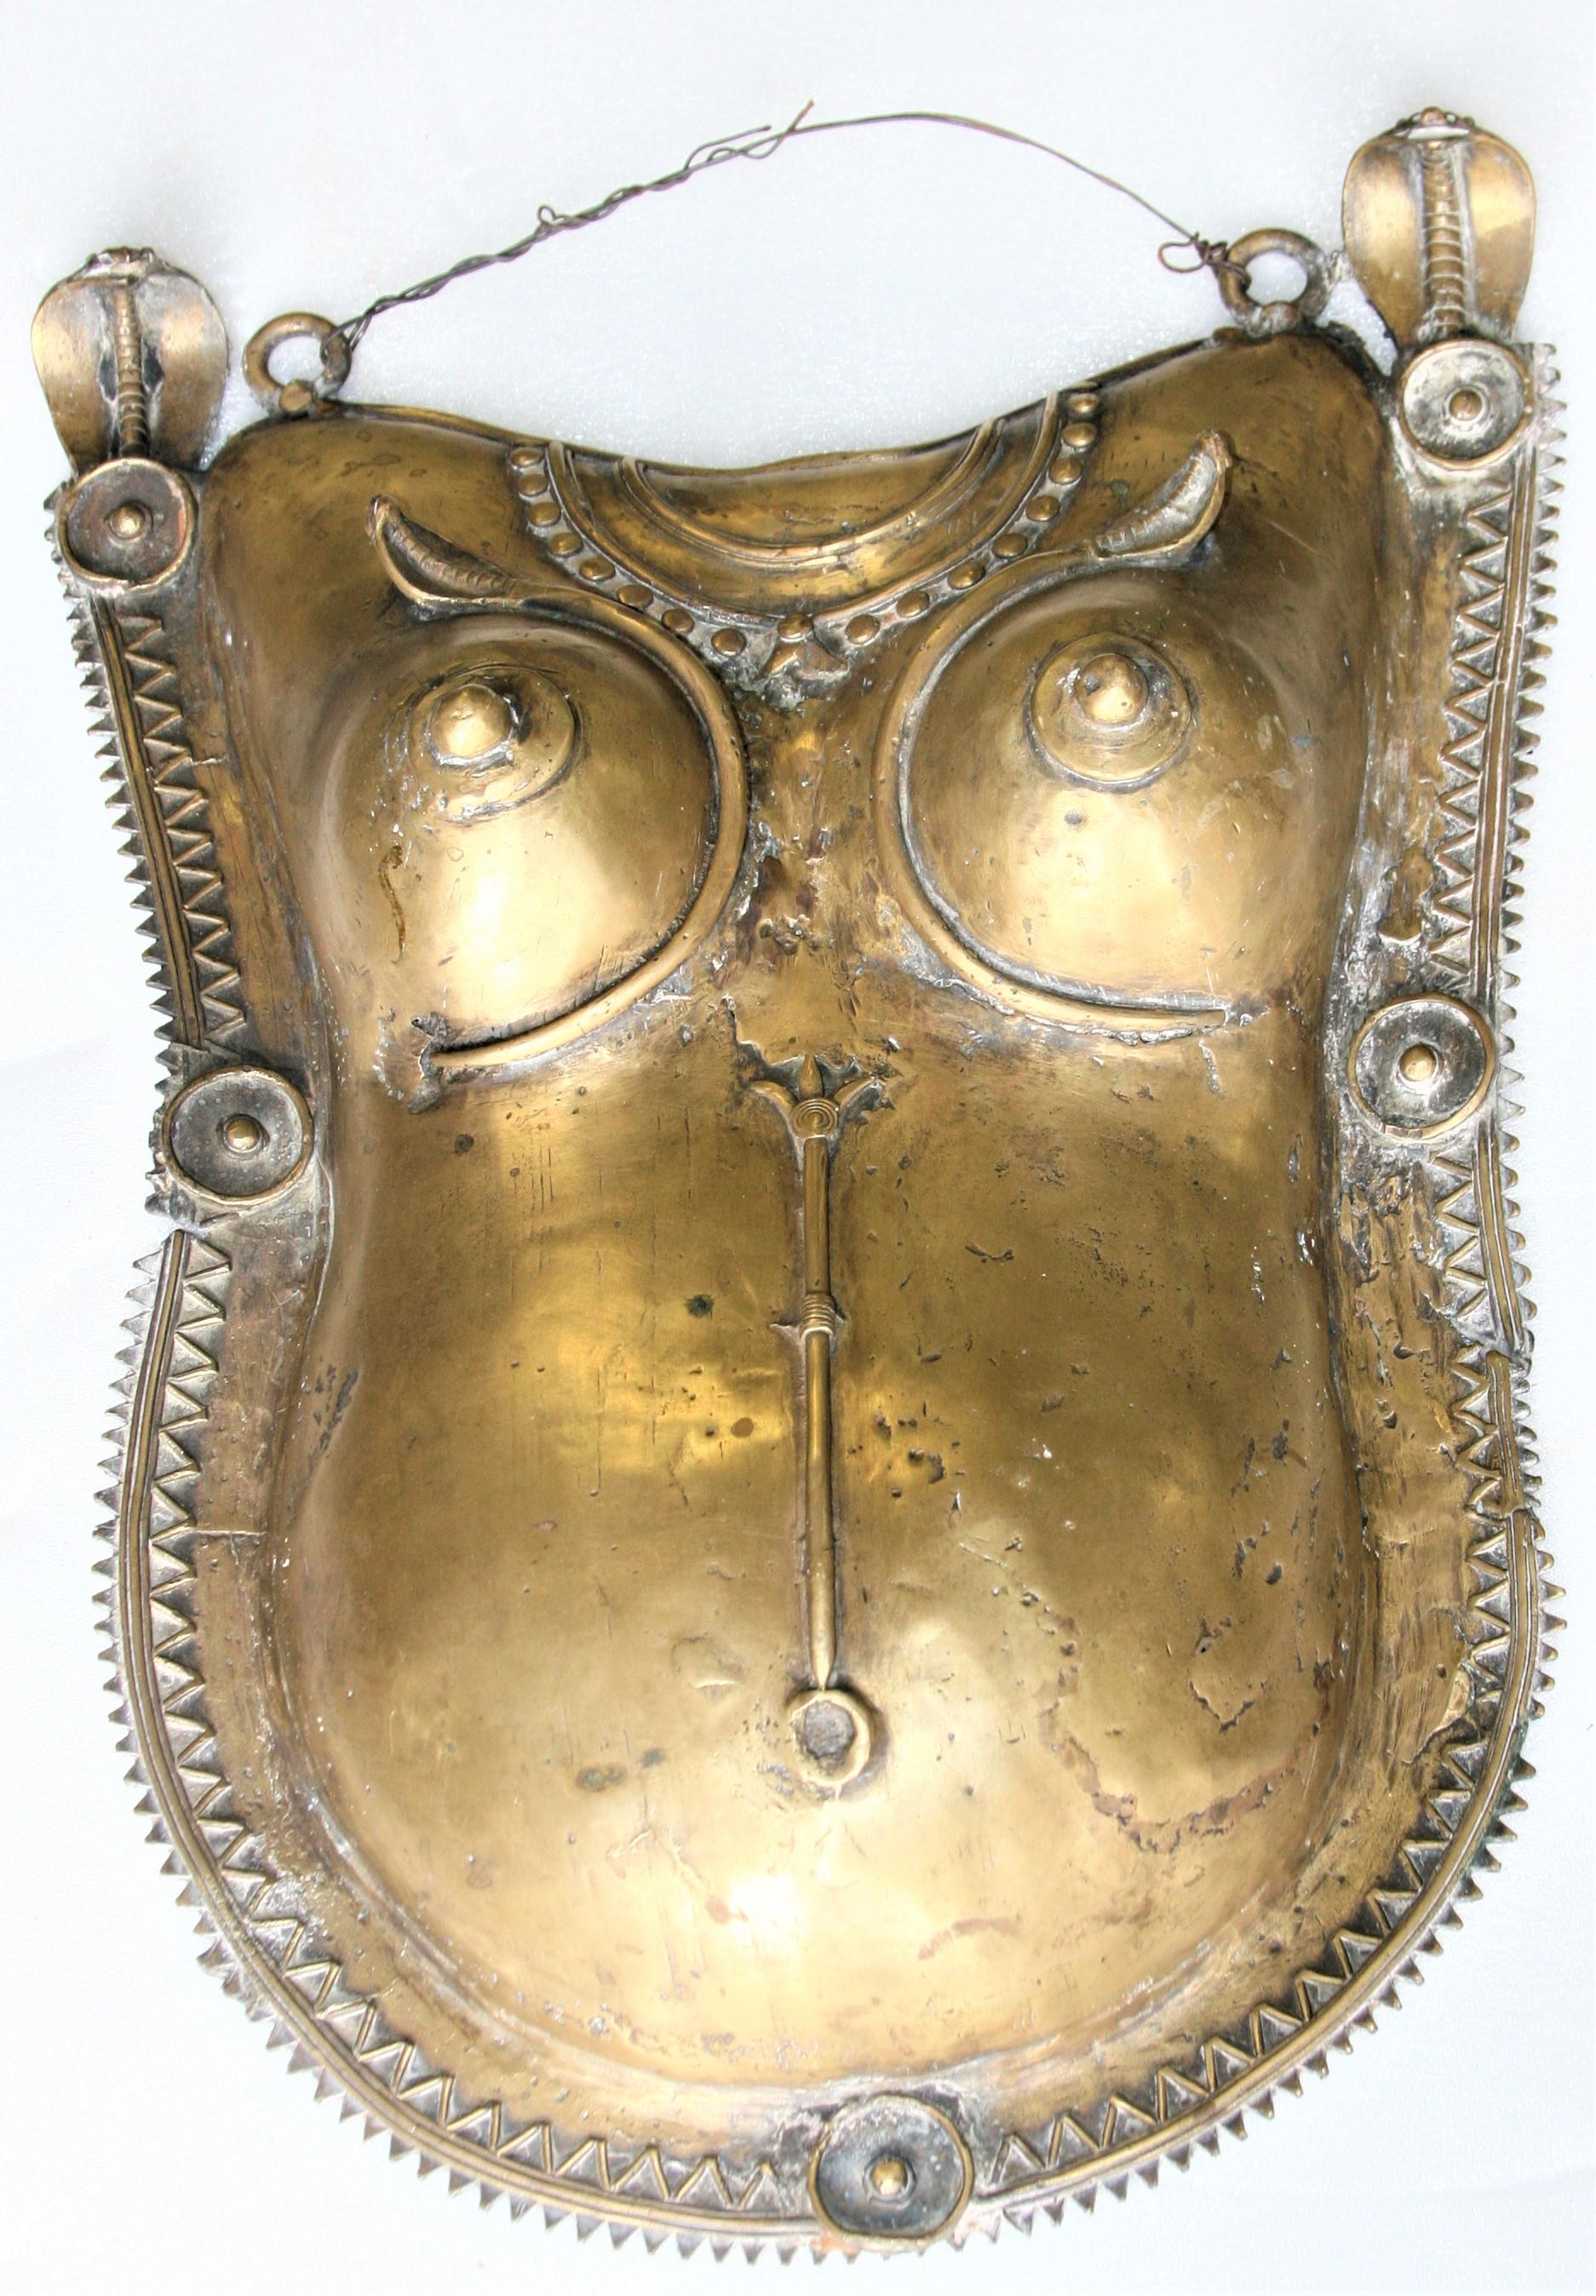 To day such delicate bronze body masks so ornately made, can be found only in museums. View the ornately made mask with stylized cobras on the shoulders. The mask after it was cast was hand chiseled to perfection. The two snakes intertwined and end